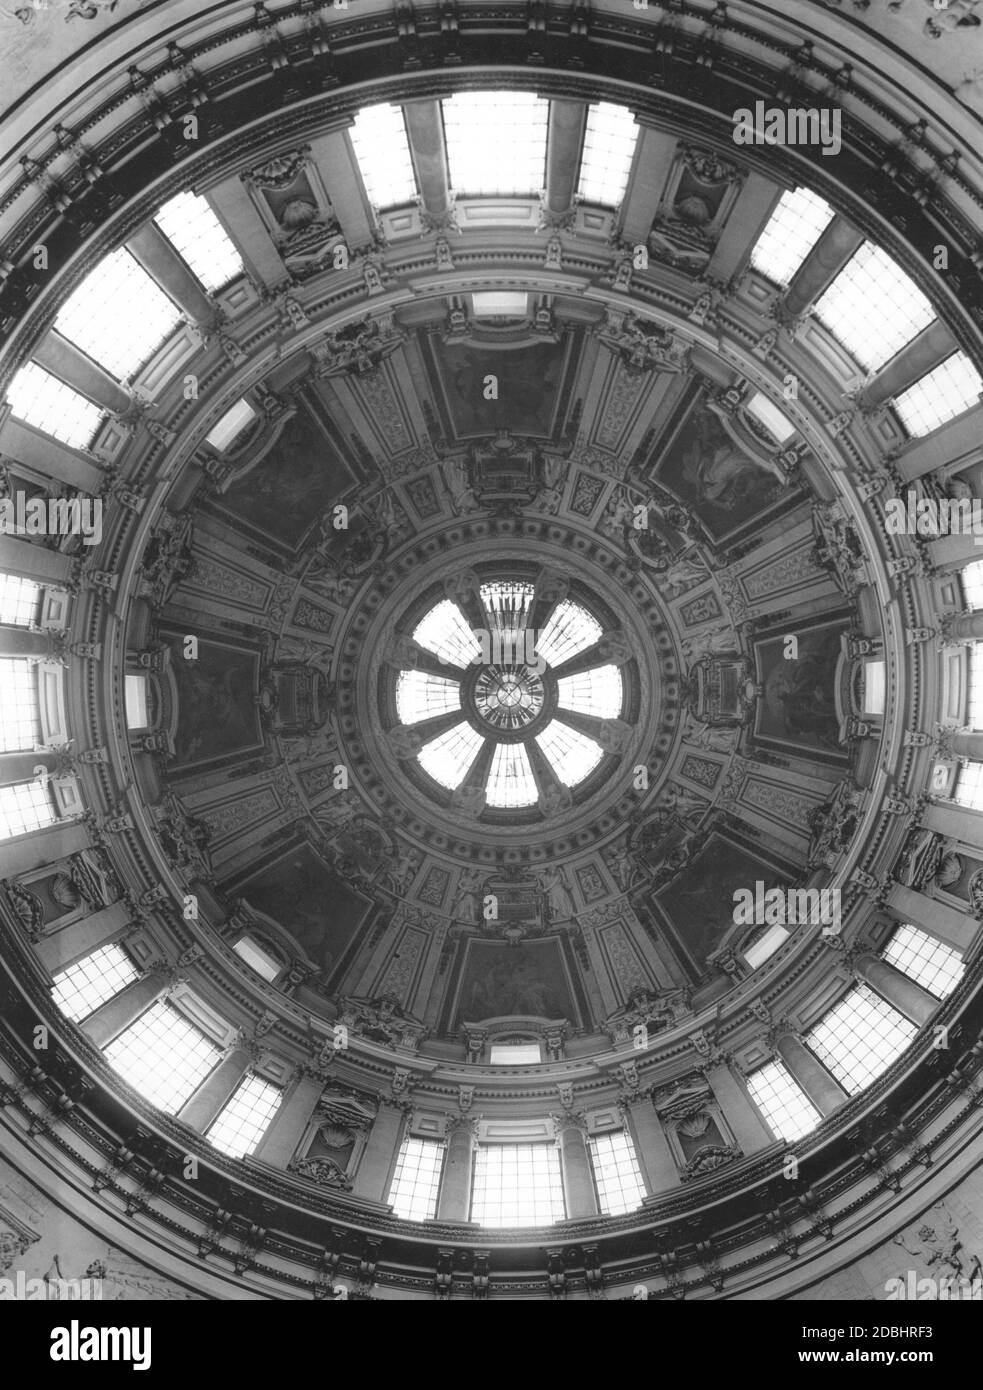 The photograph from 1932 shows the dome of the Berlin Cathedral seen from below. Stock Photo